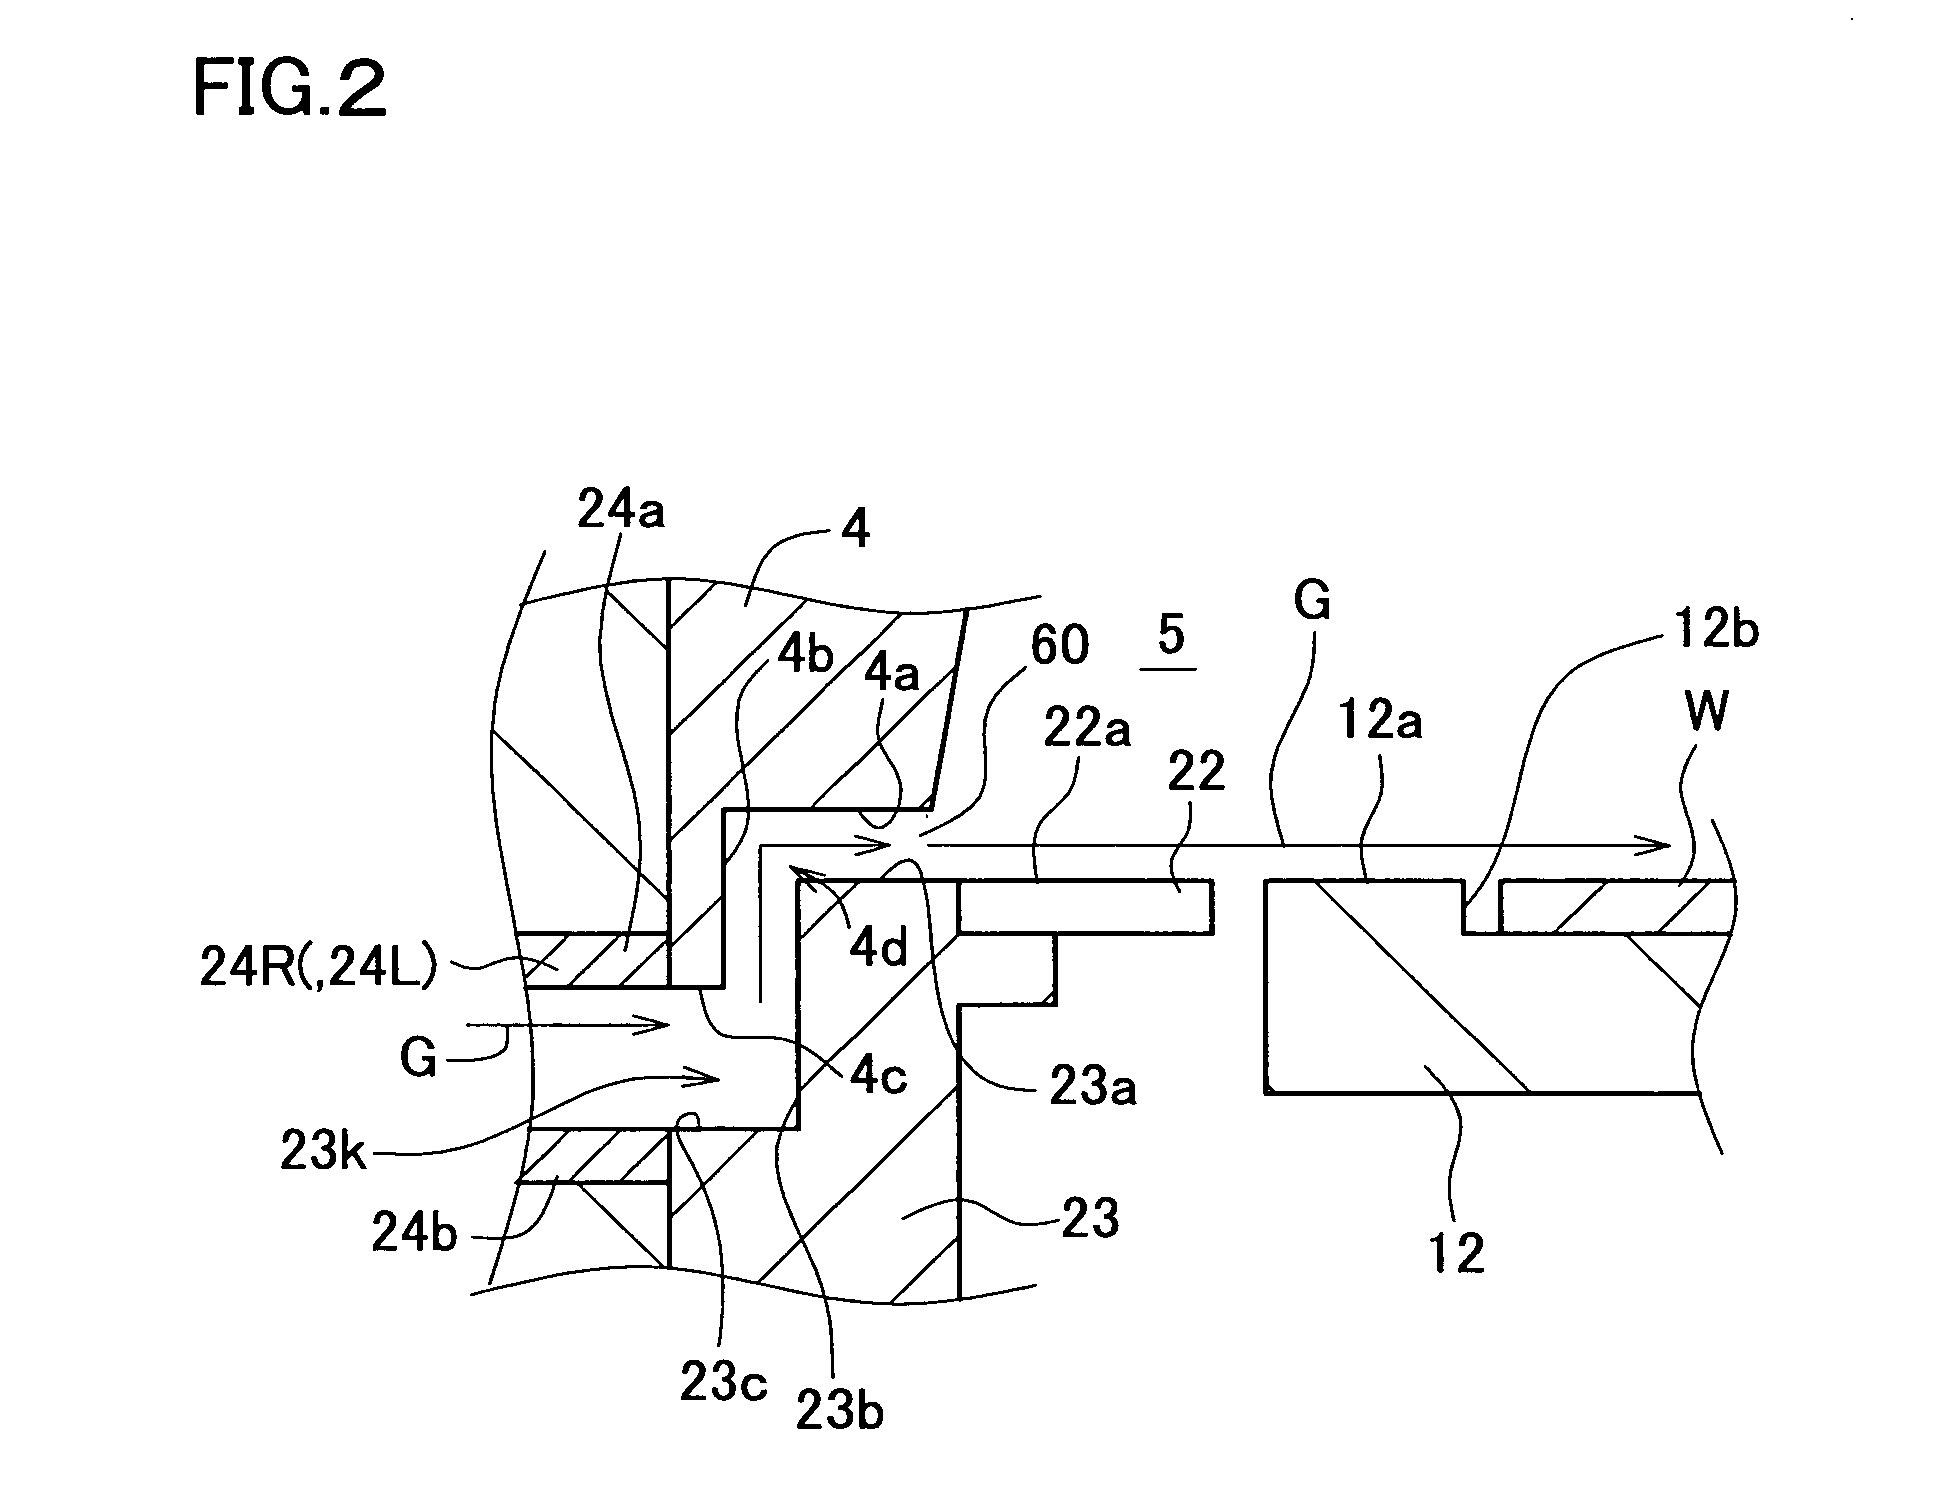 Vapor phase growth apparatus and method of fabricating epitaxial wafer